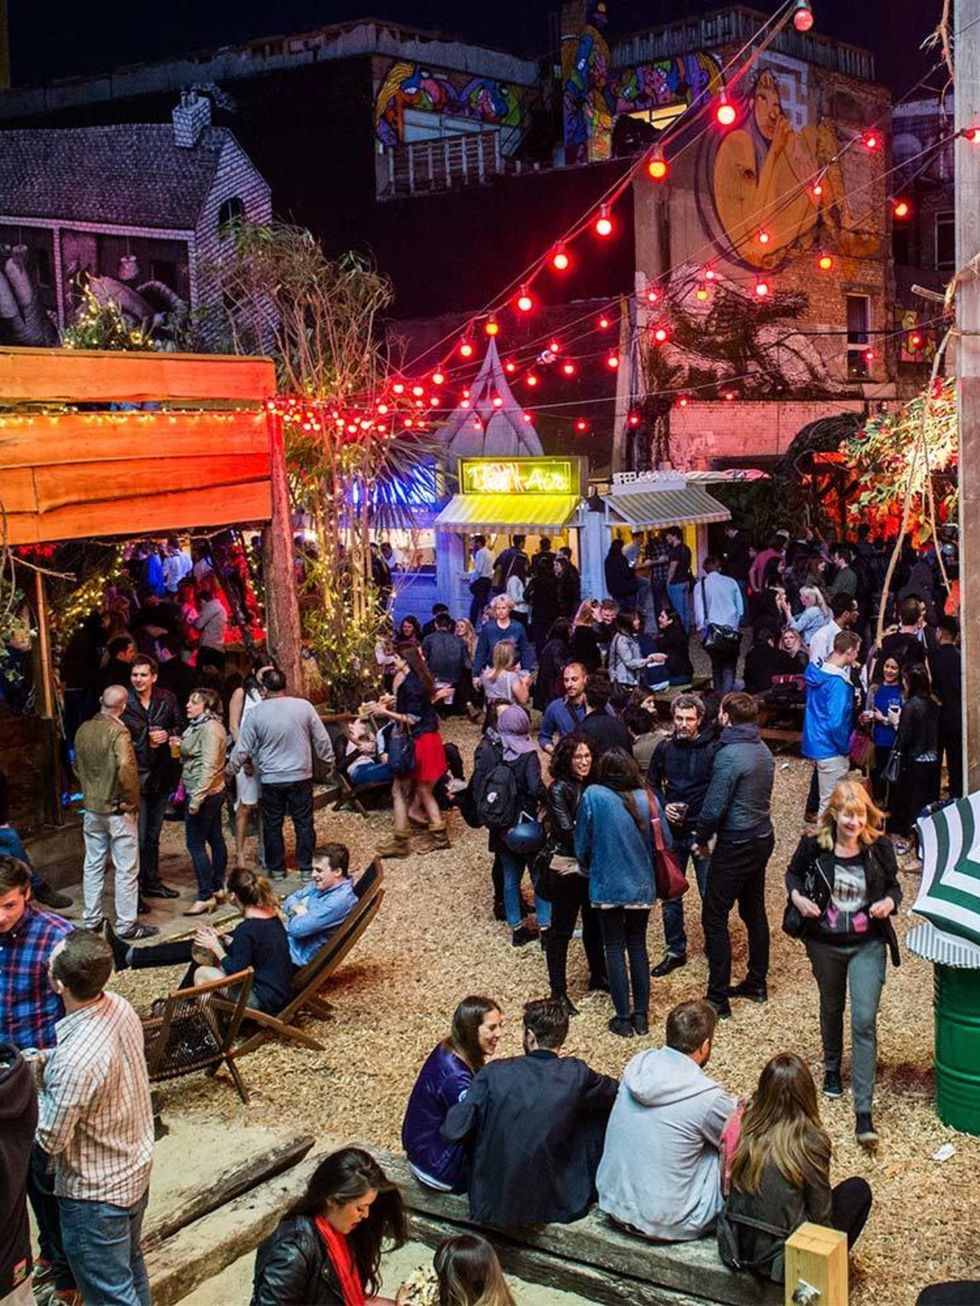 <p>POP-UP: Red Market &ndash; Last Days of Shoreditch</p>

<p>As the saying goes, all good things must come to an end &ndash; so you may as well get in as many street eats and cocktails as you can. Or something to that effect&hellip; And they&rsquo;re wis